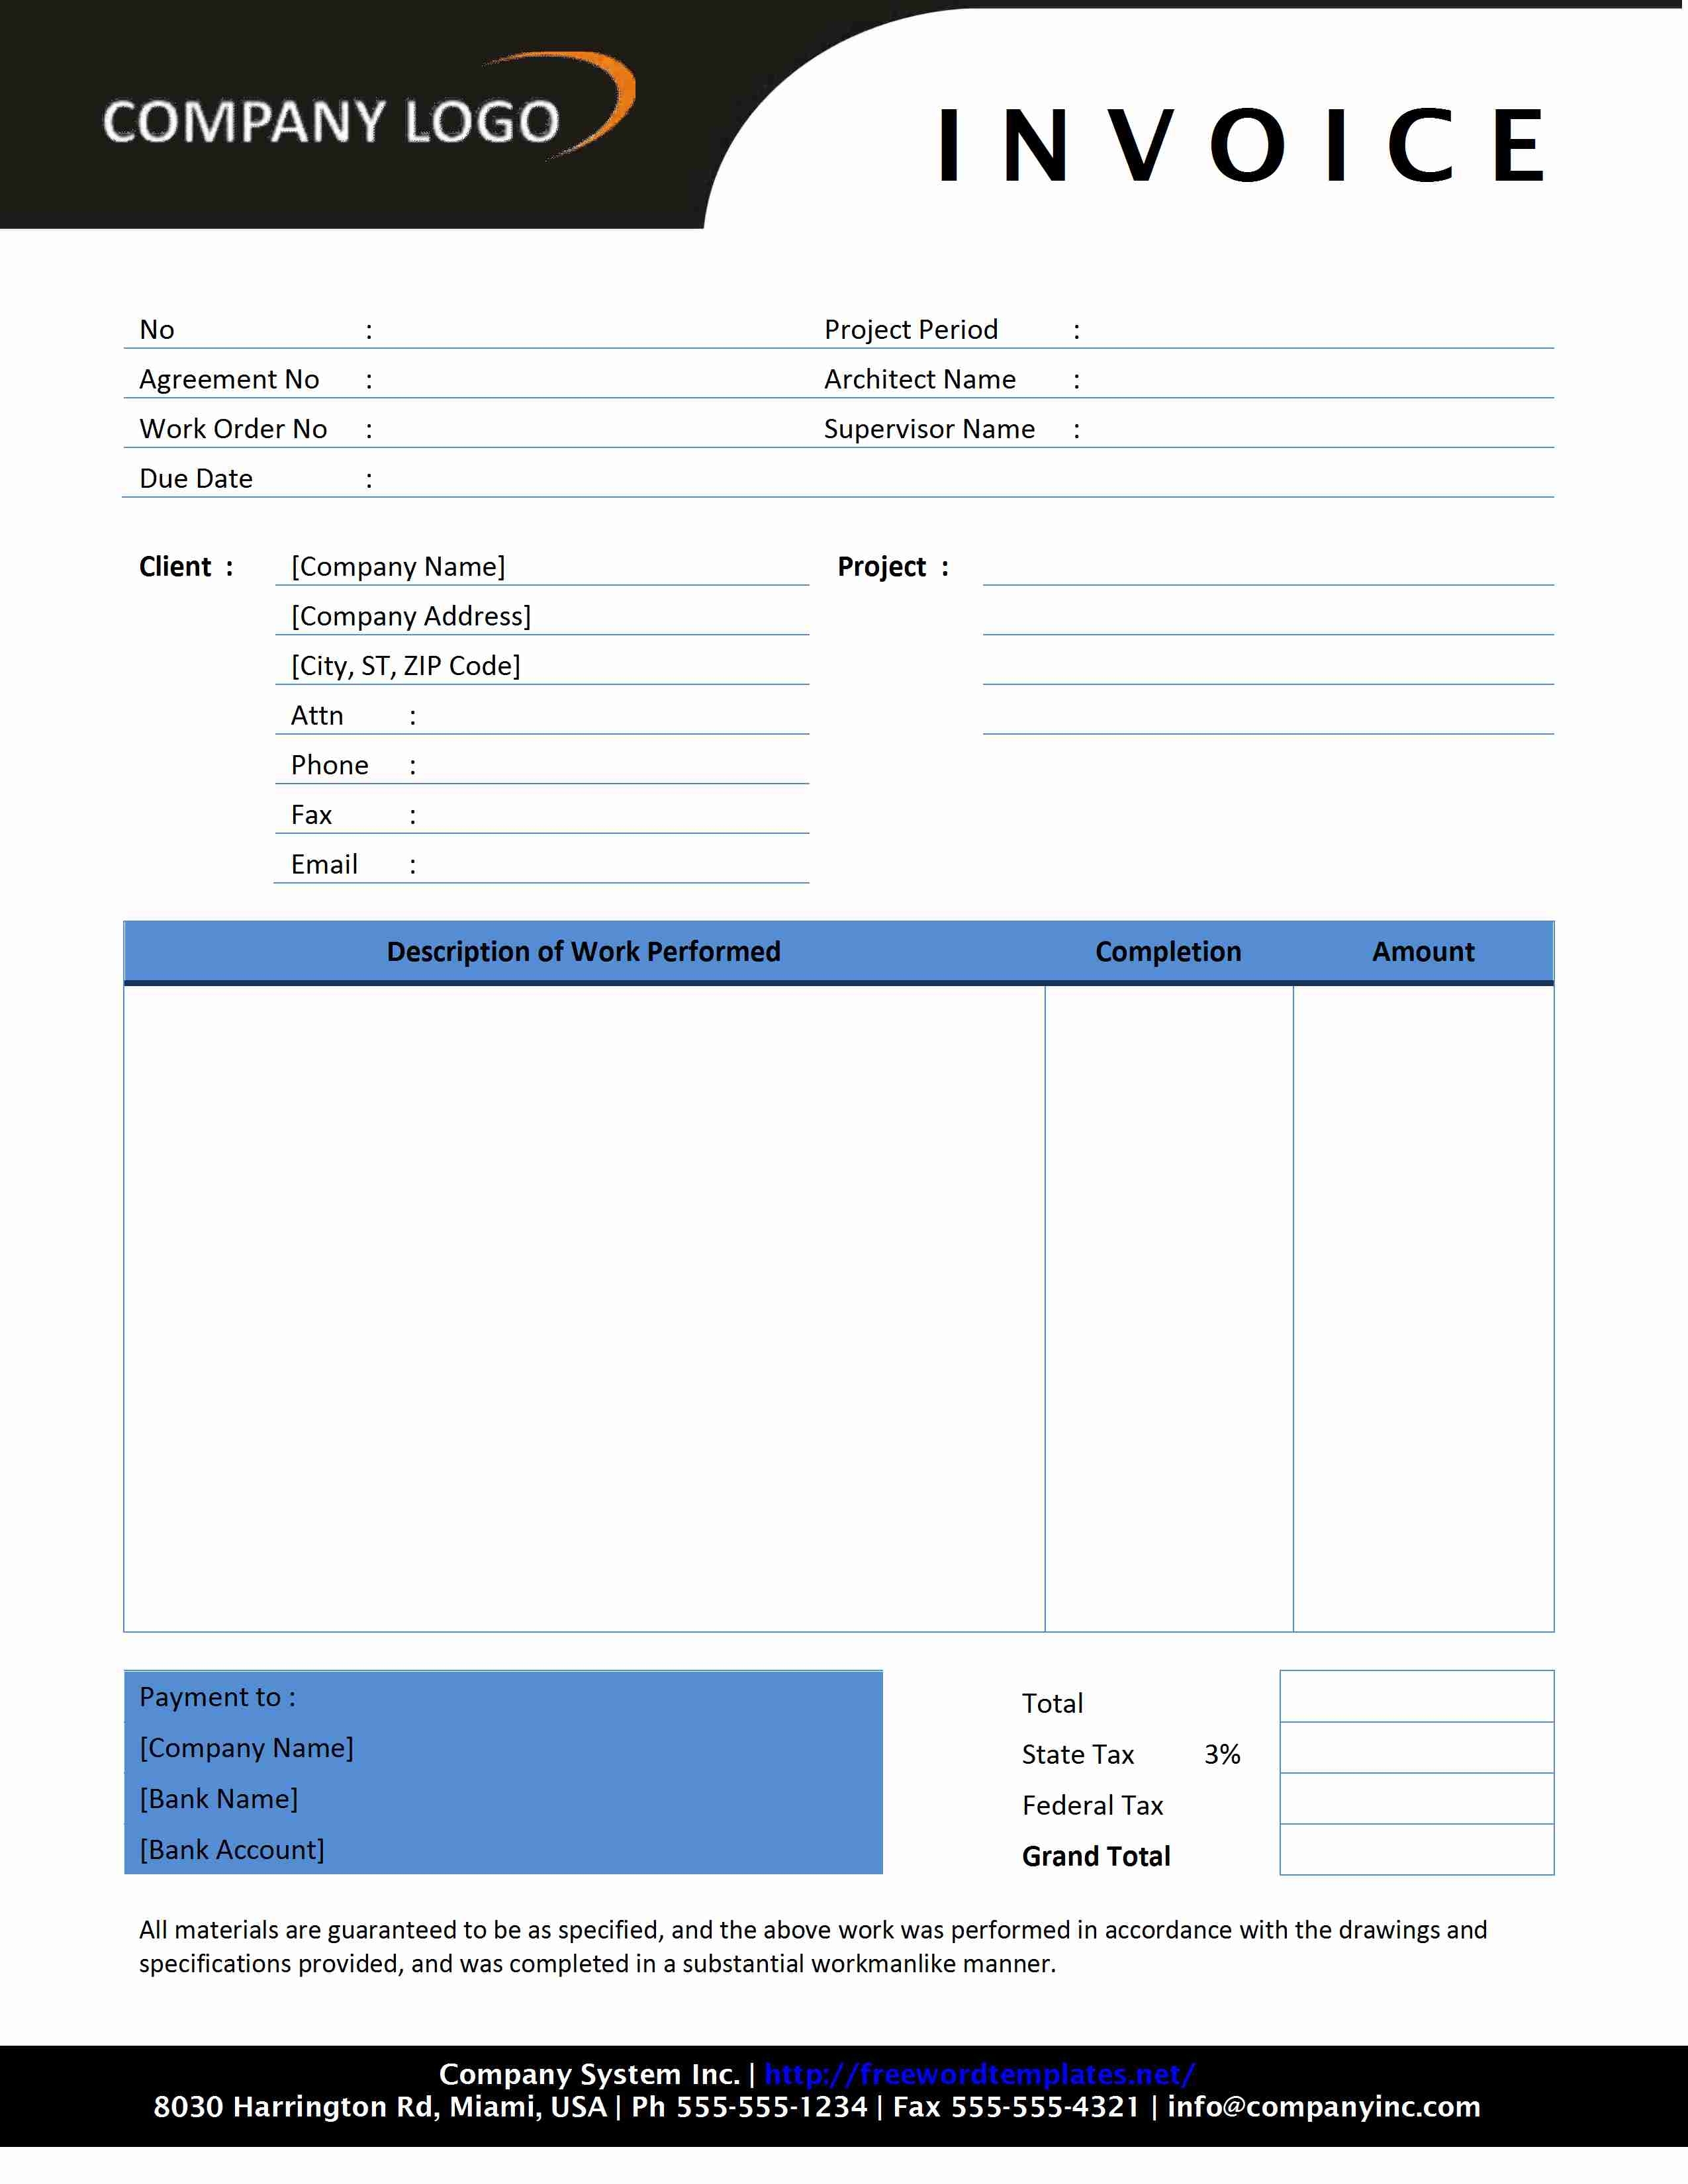 ms office invoice template download